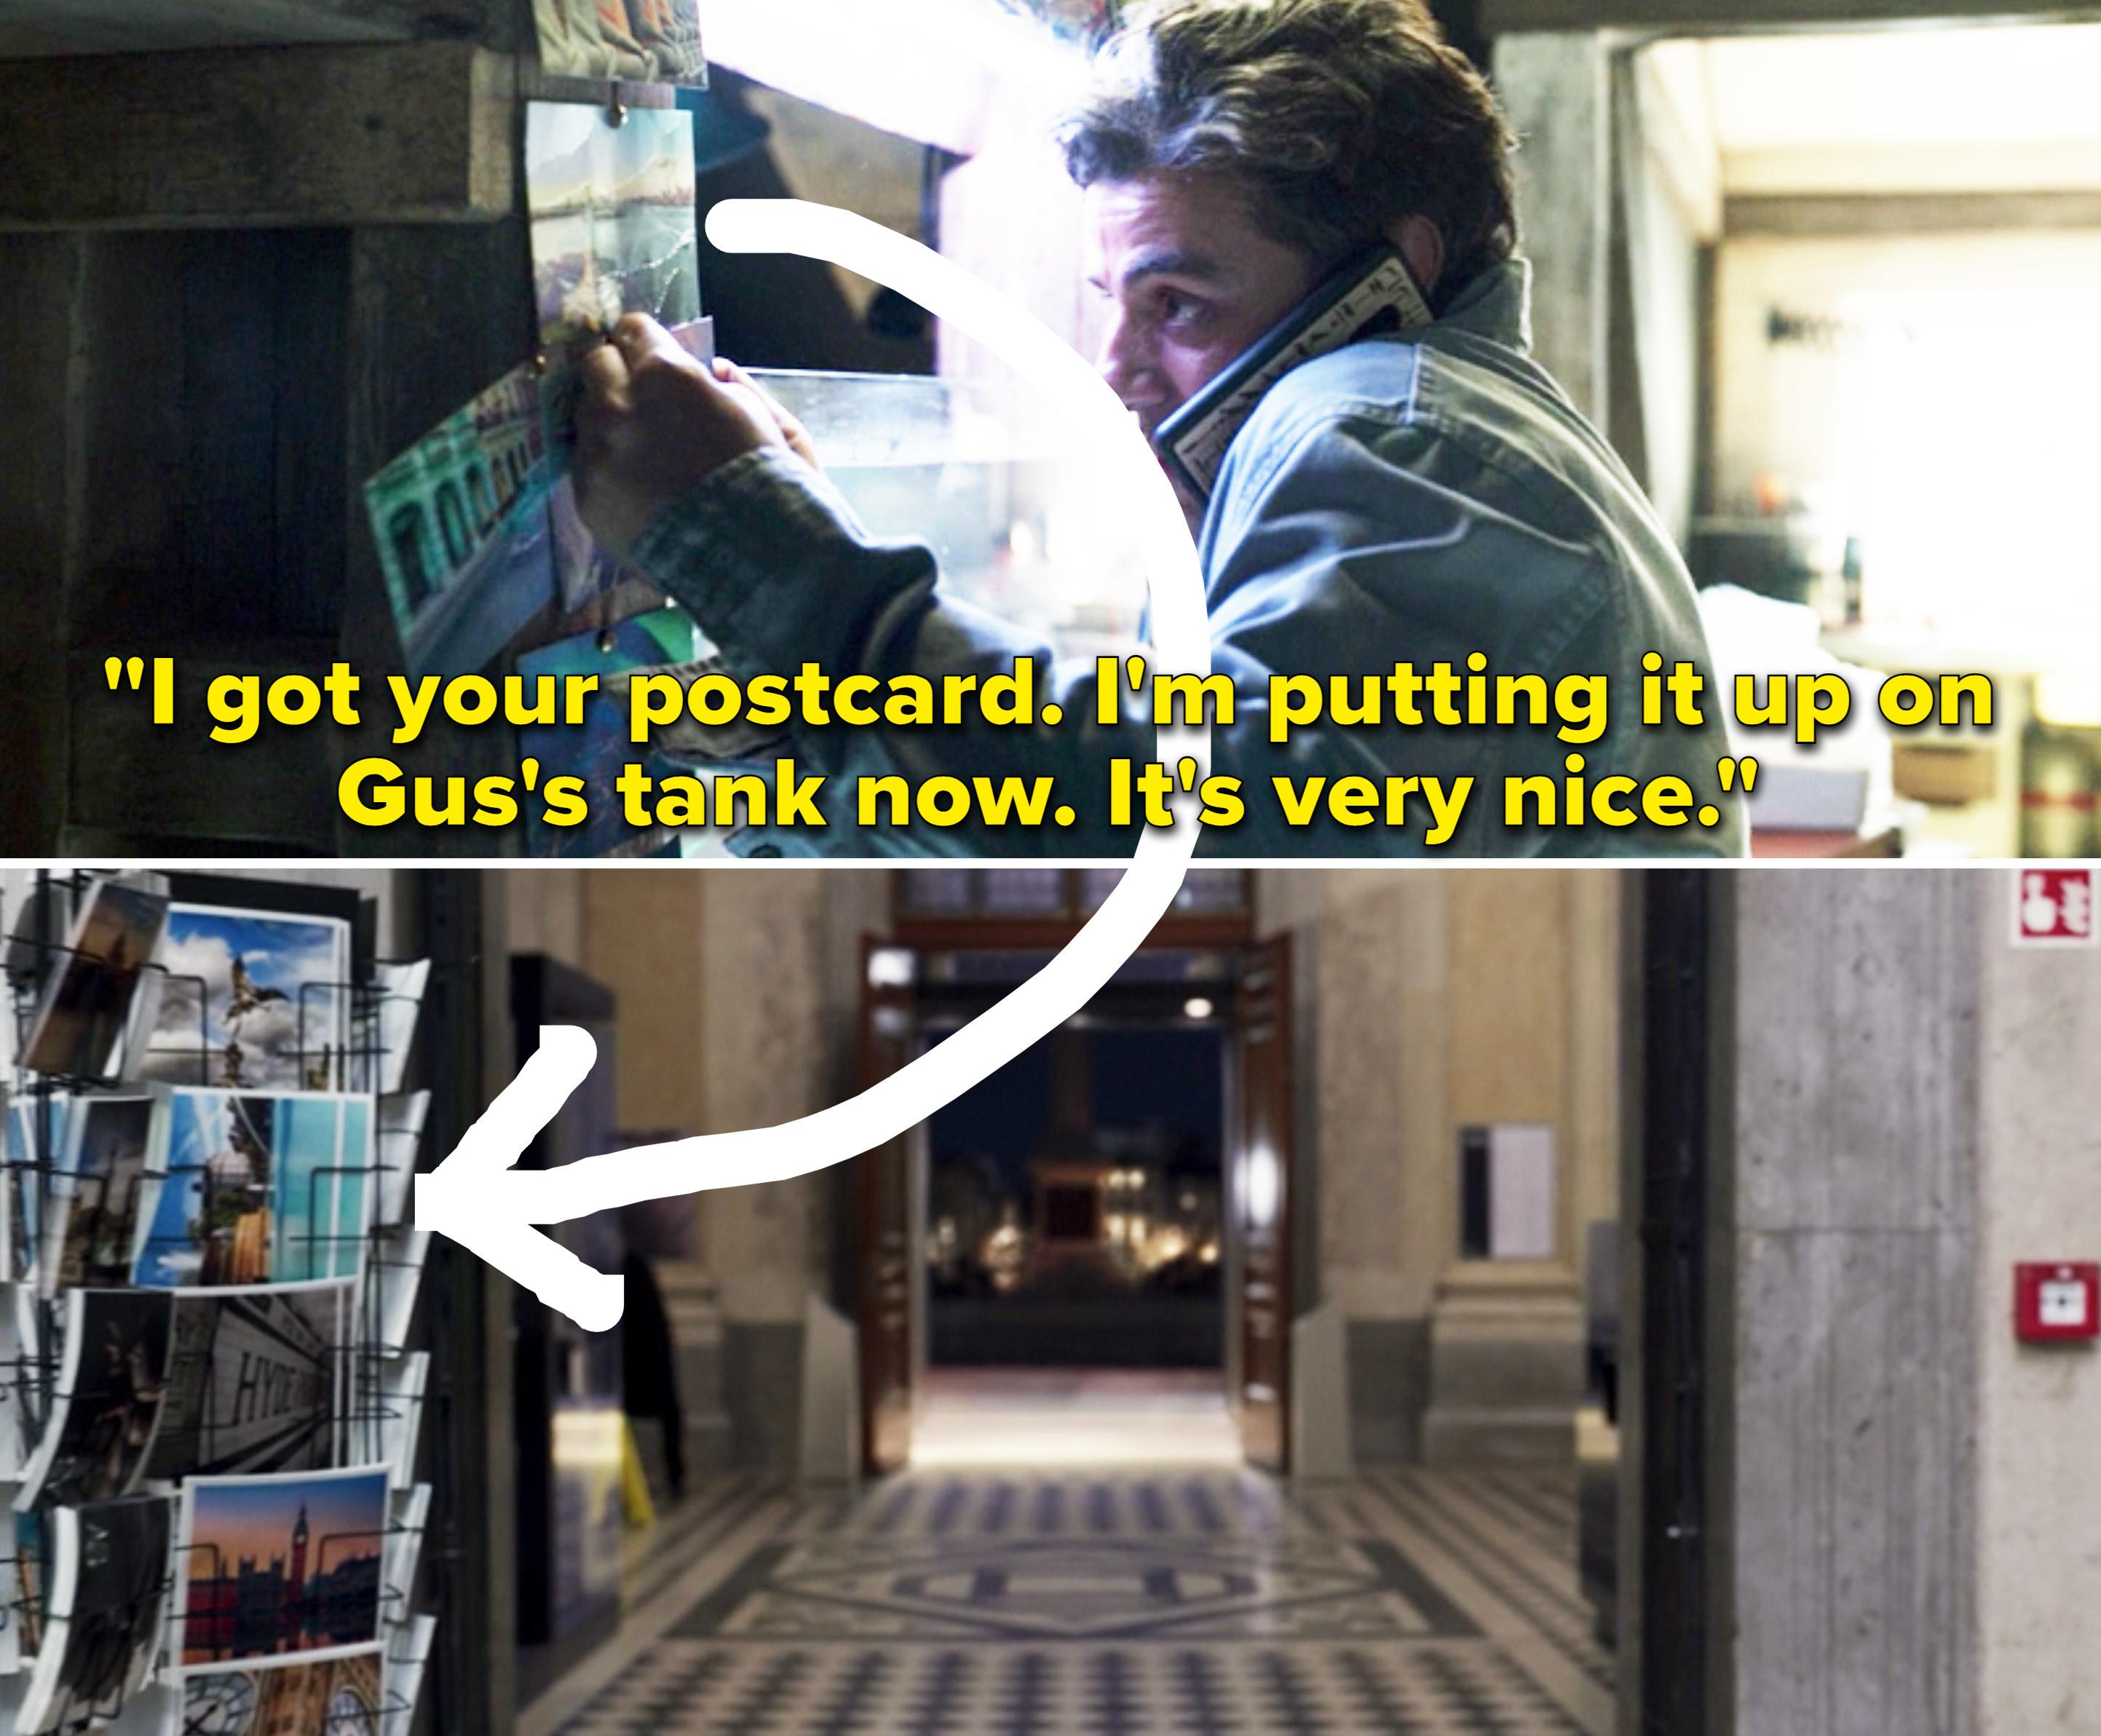 in one scene Steven is putting a postcard up and in the next an arrow points to the rack of postcards